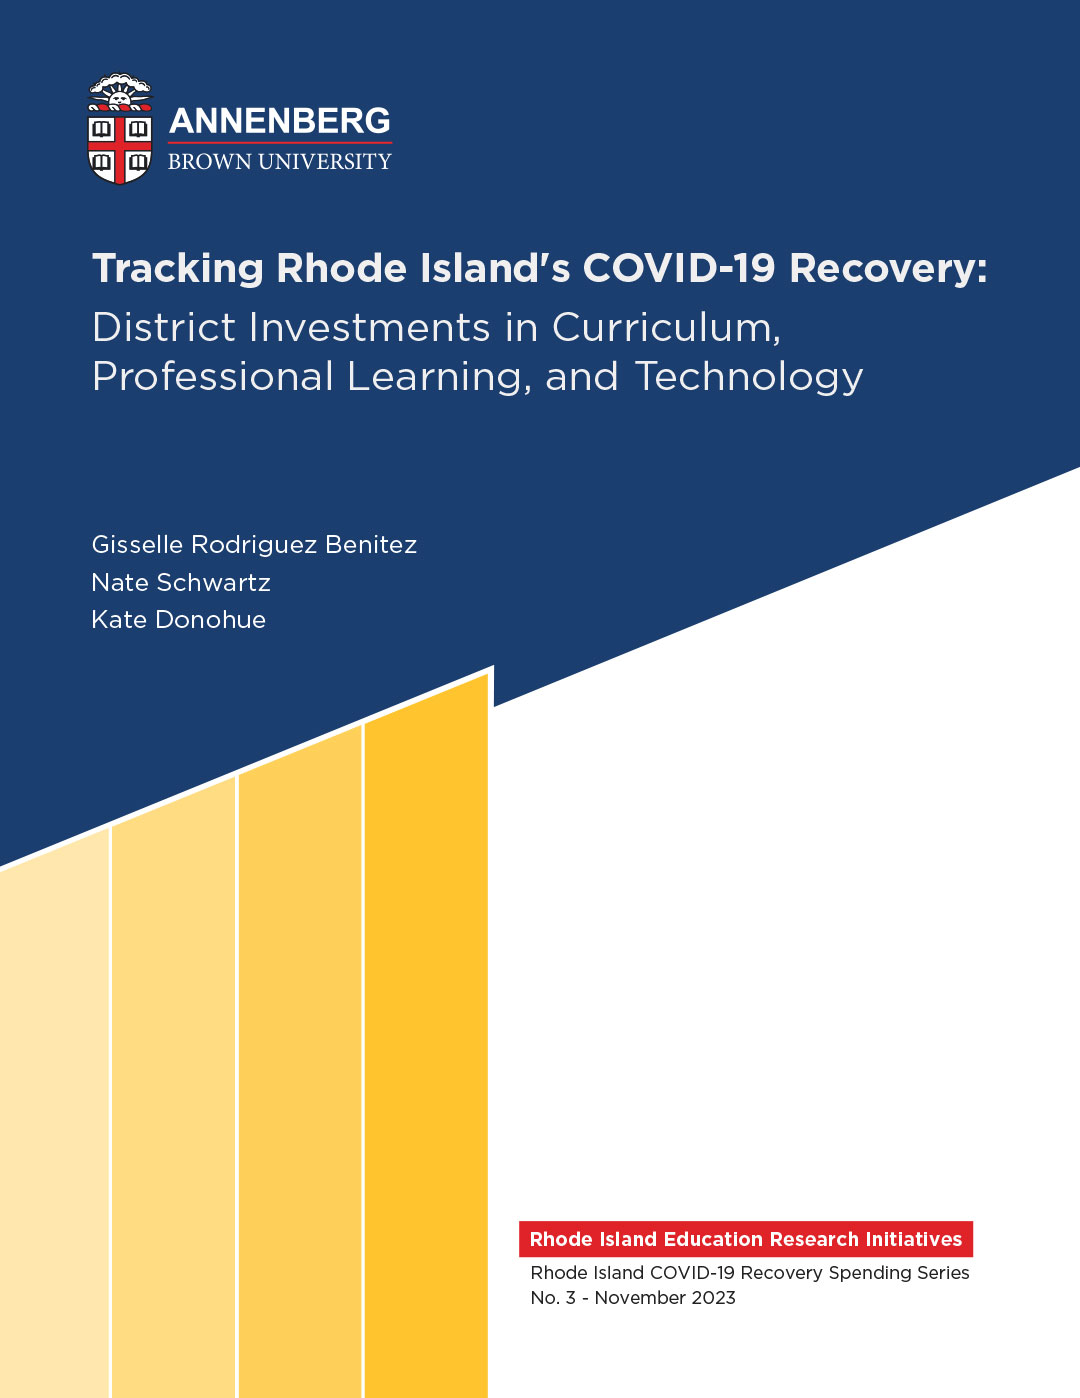 Tracking Rhode Island's COVID-19 Recovery: District Investments in Curriculum, Professional Learning, and Technology